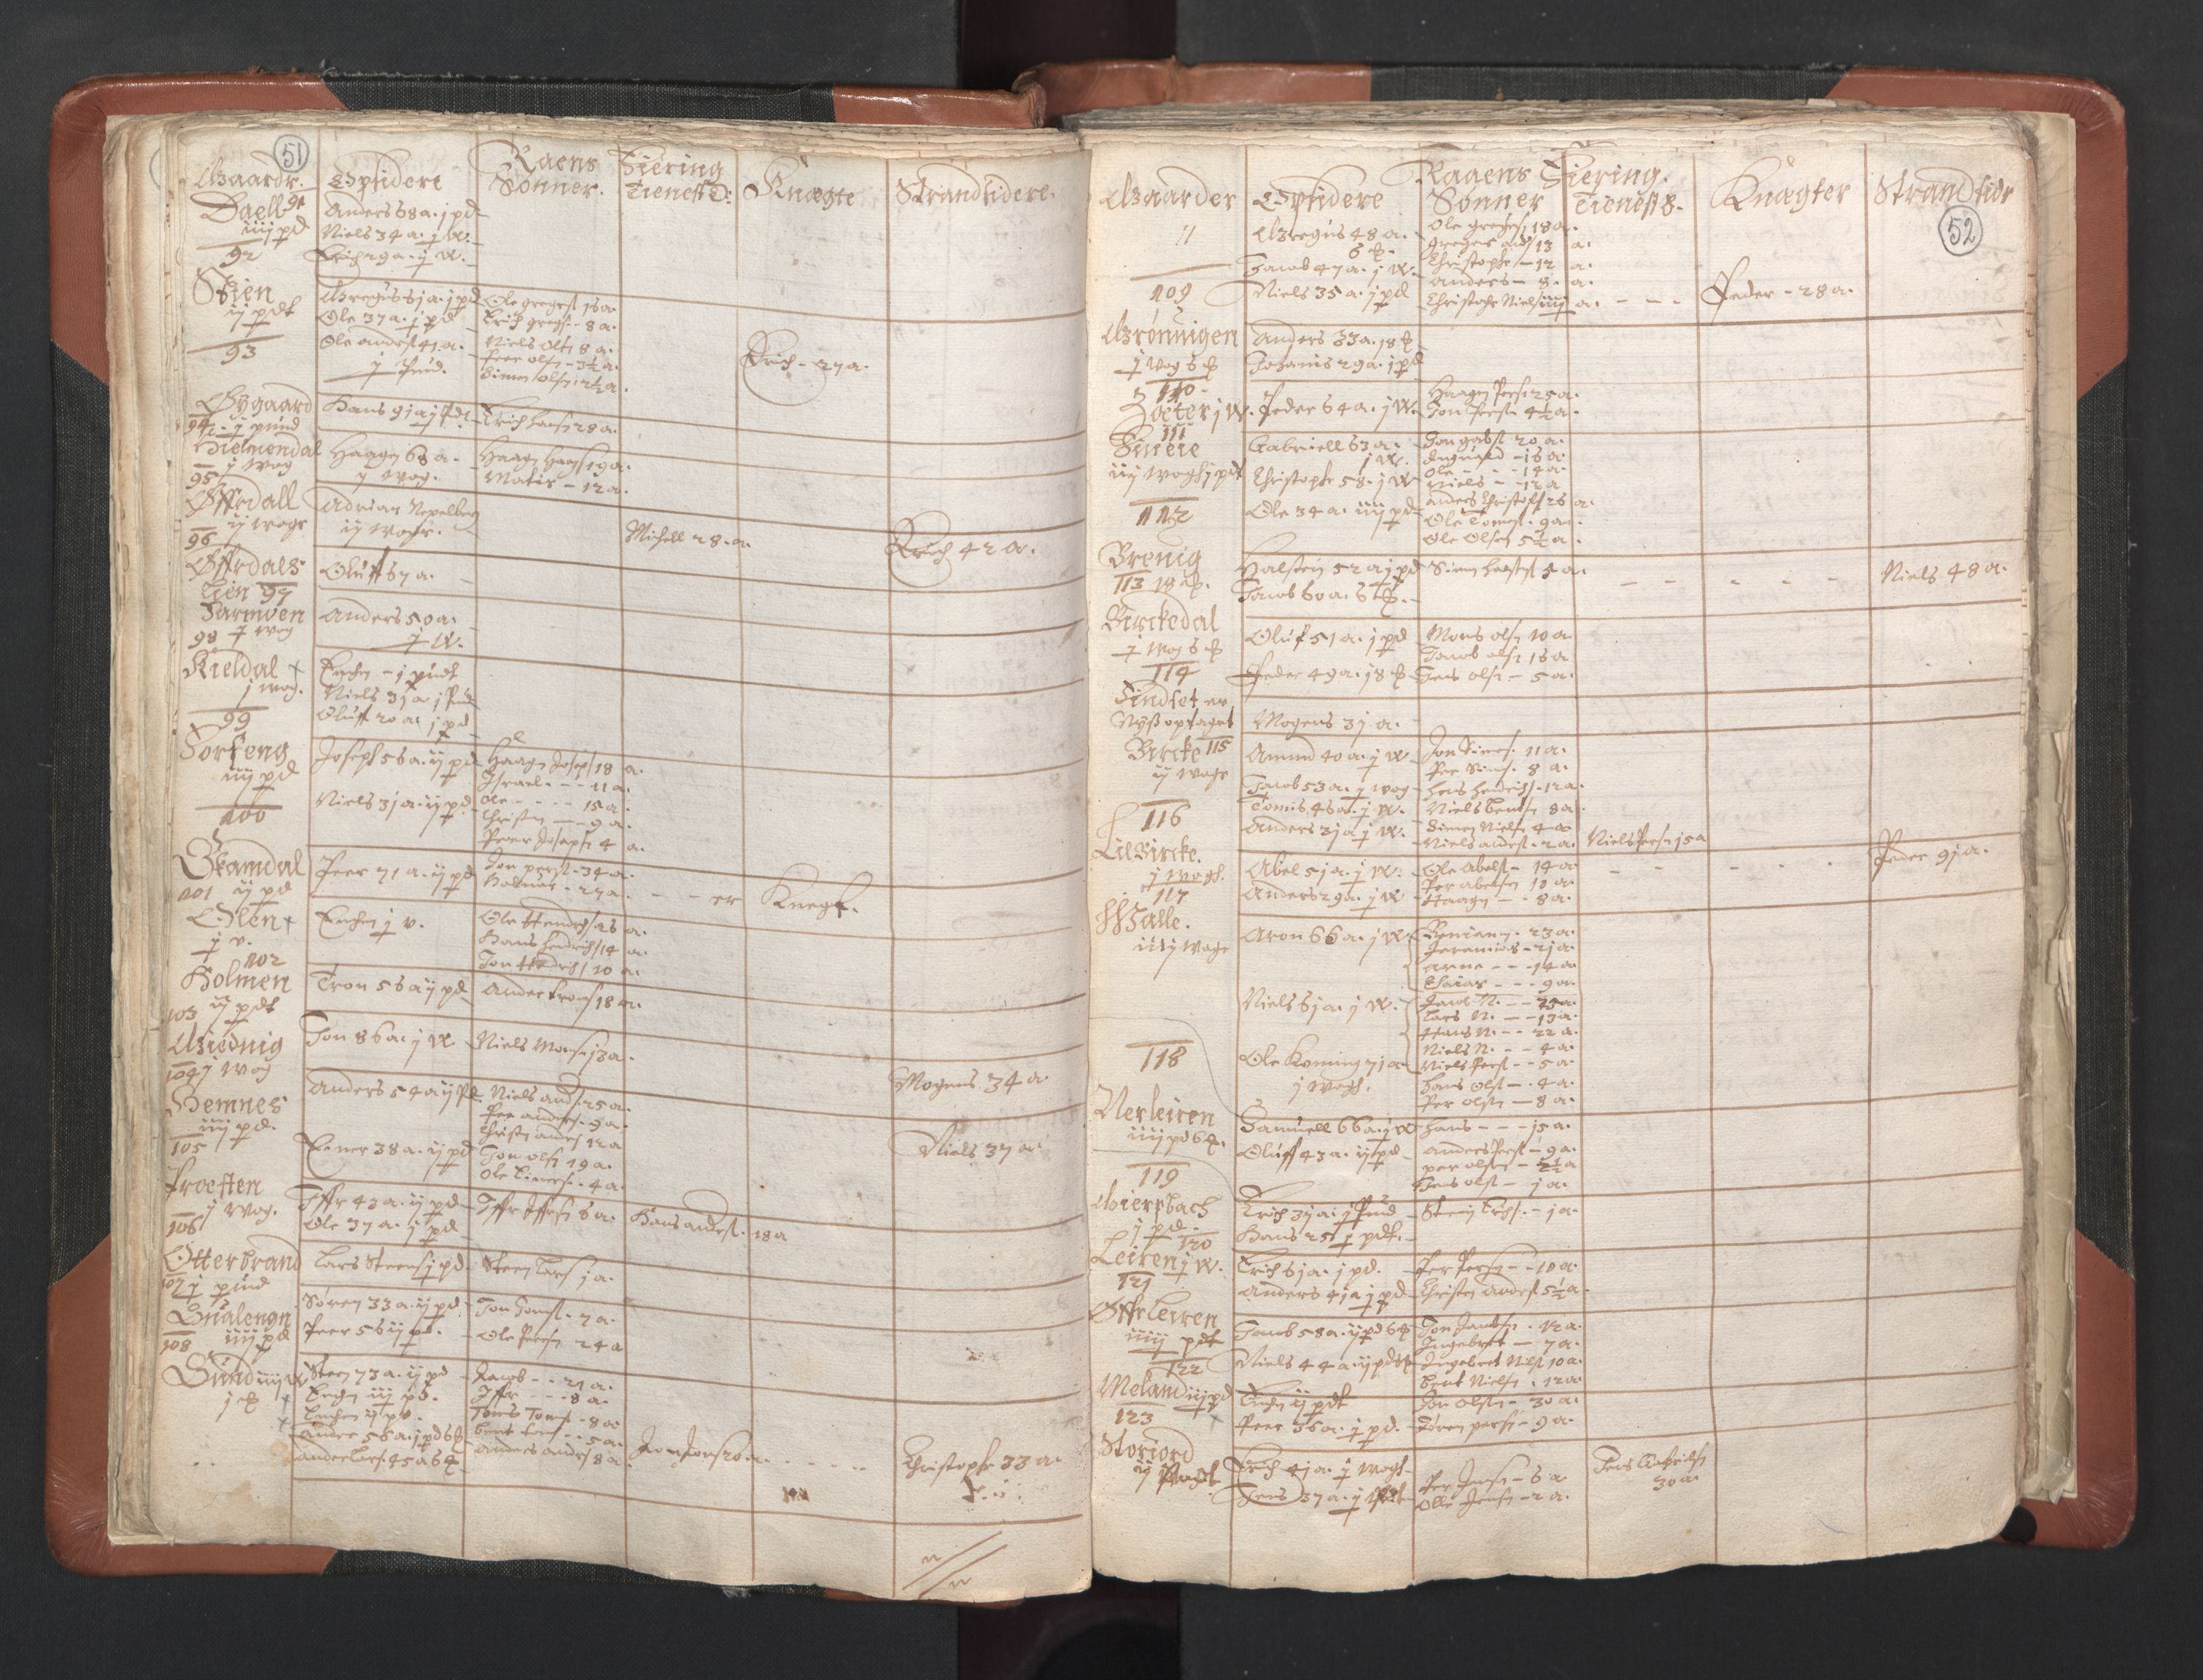 RA, Vicar's Census 1664-1666, no. 35: Helgeland deanery and Salten deanery, 1664-1666, p. 51-52